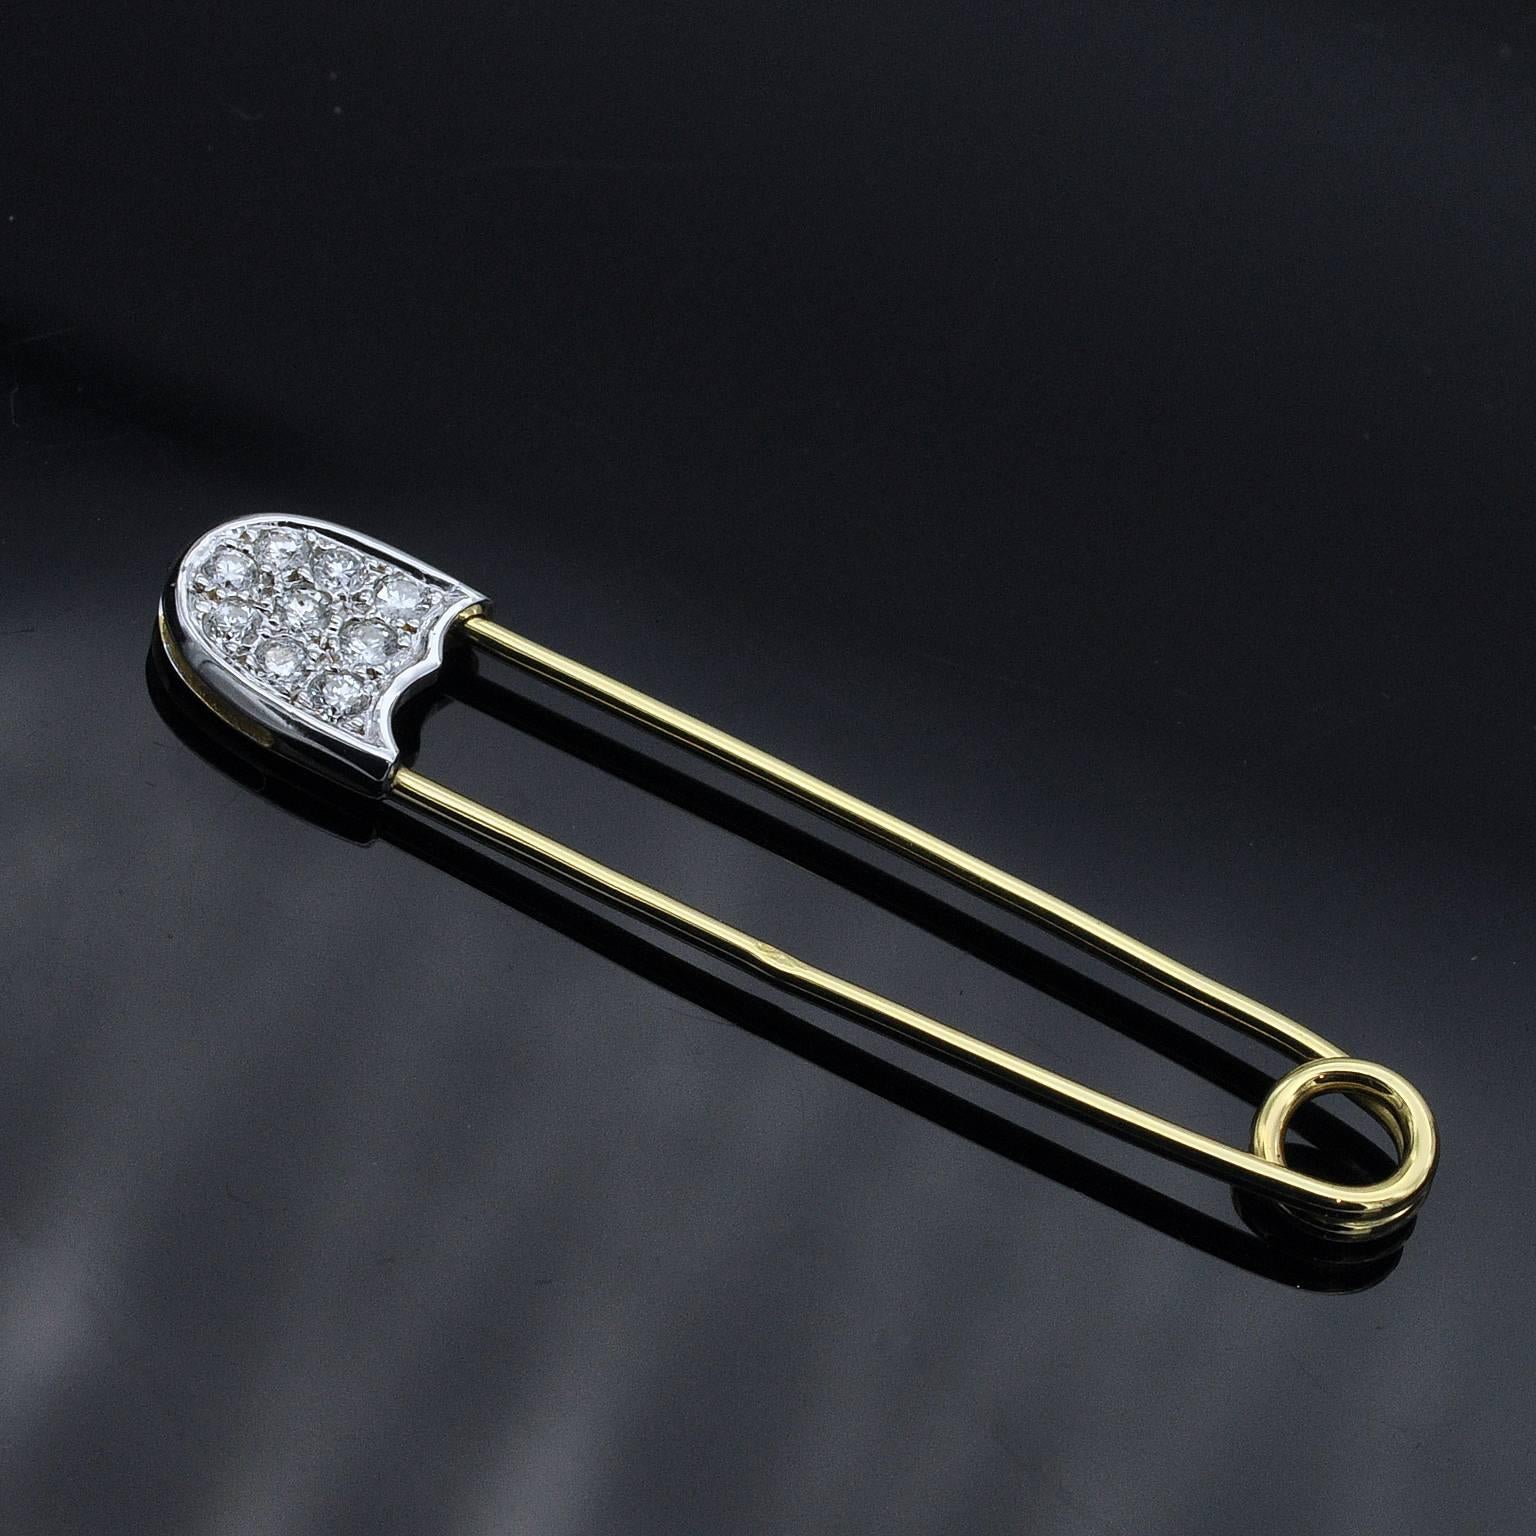 Delightful modern 18 kt yellow gold safety pin brooch amulet. 0,17 carat of round diamond are set on it's head. This item is new and very well made. Adorable and classy !
